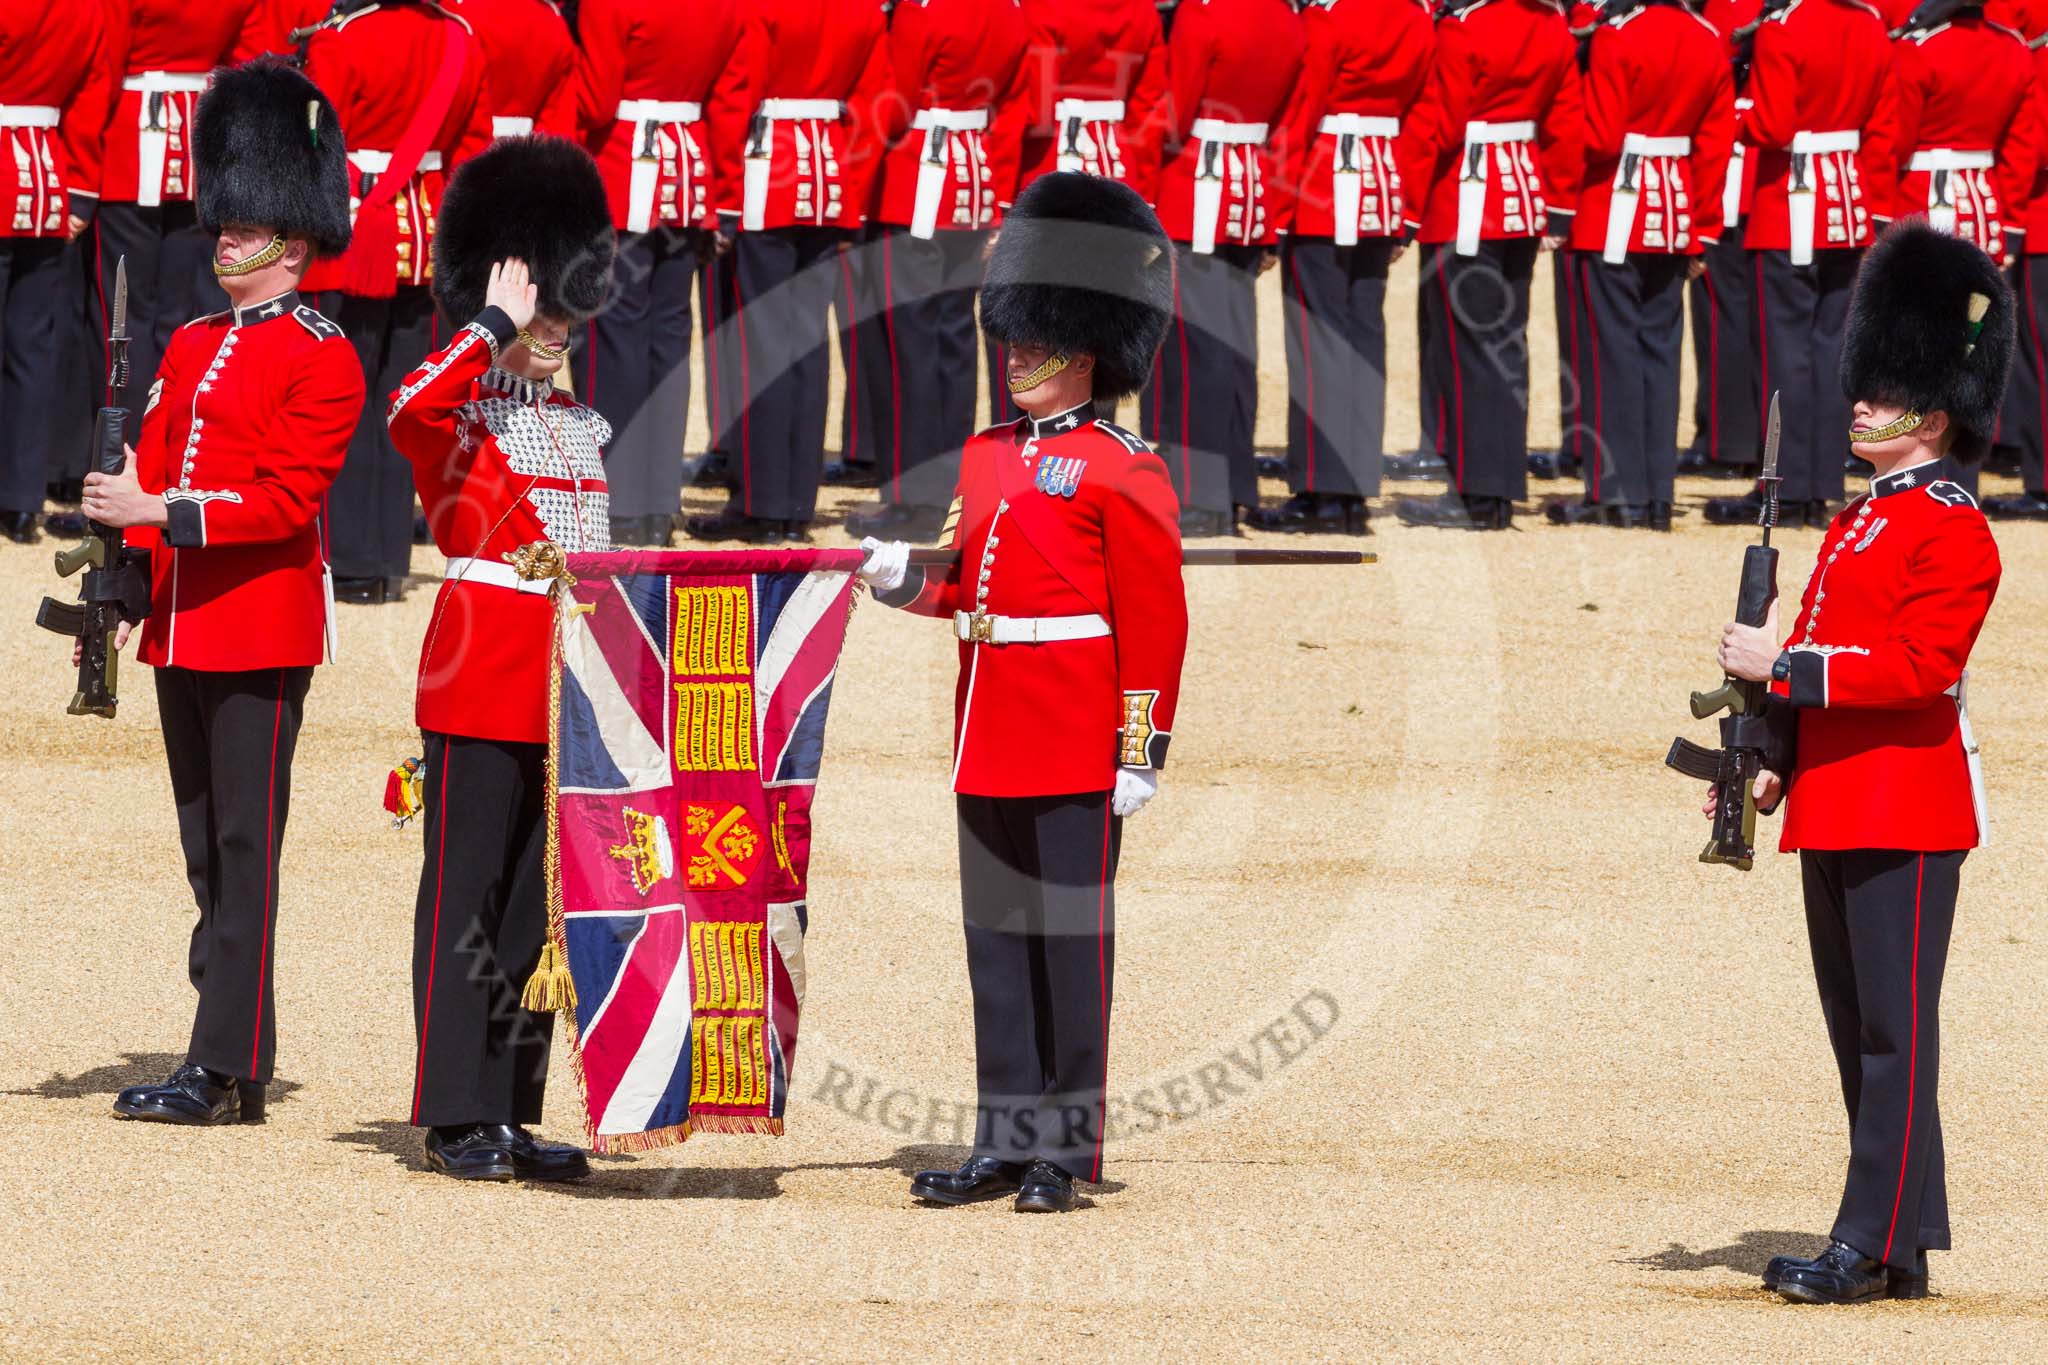 The Colonel's Review 2015.
Horse Guards Parade, Westminster,
London,

United Kingdom,
on 06 June 2015 at 10:35, image #106